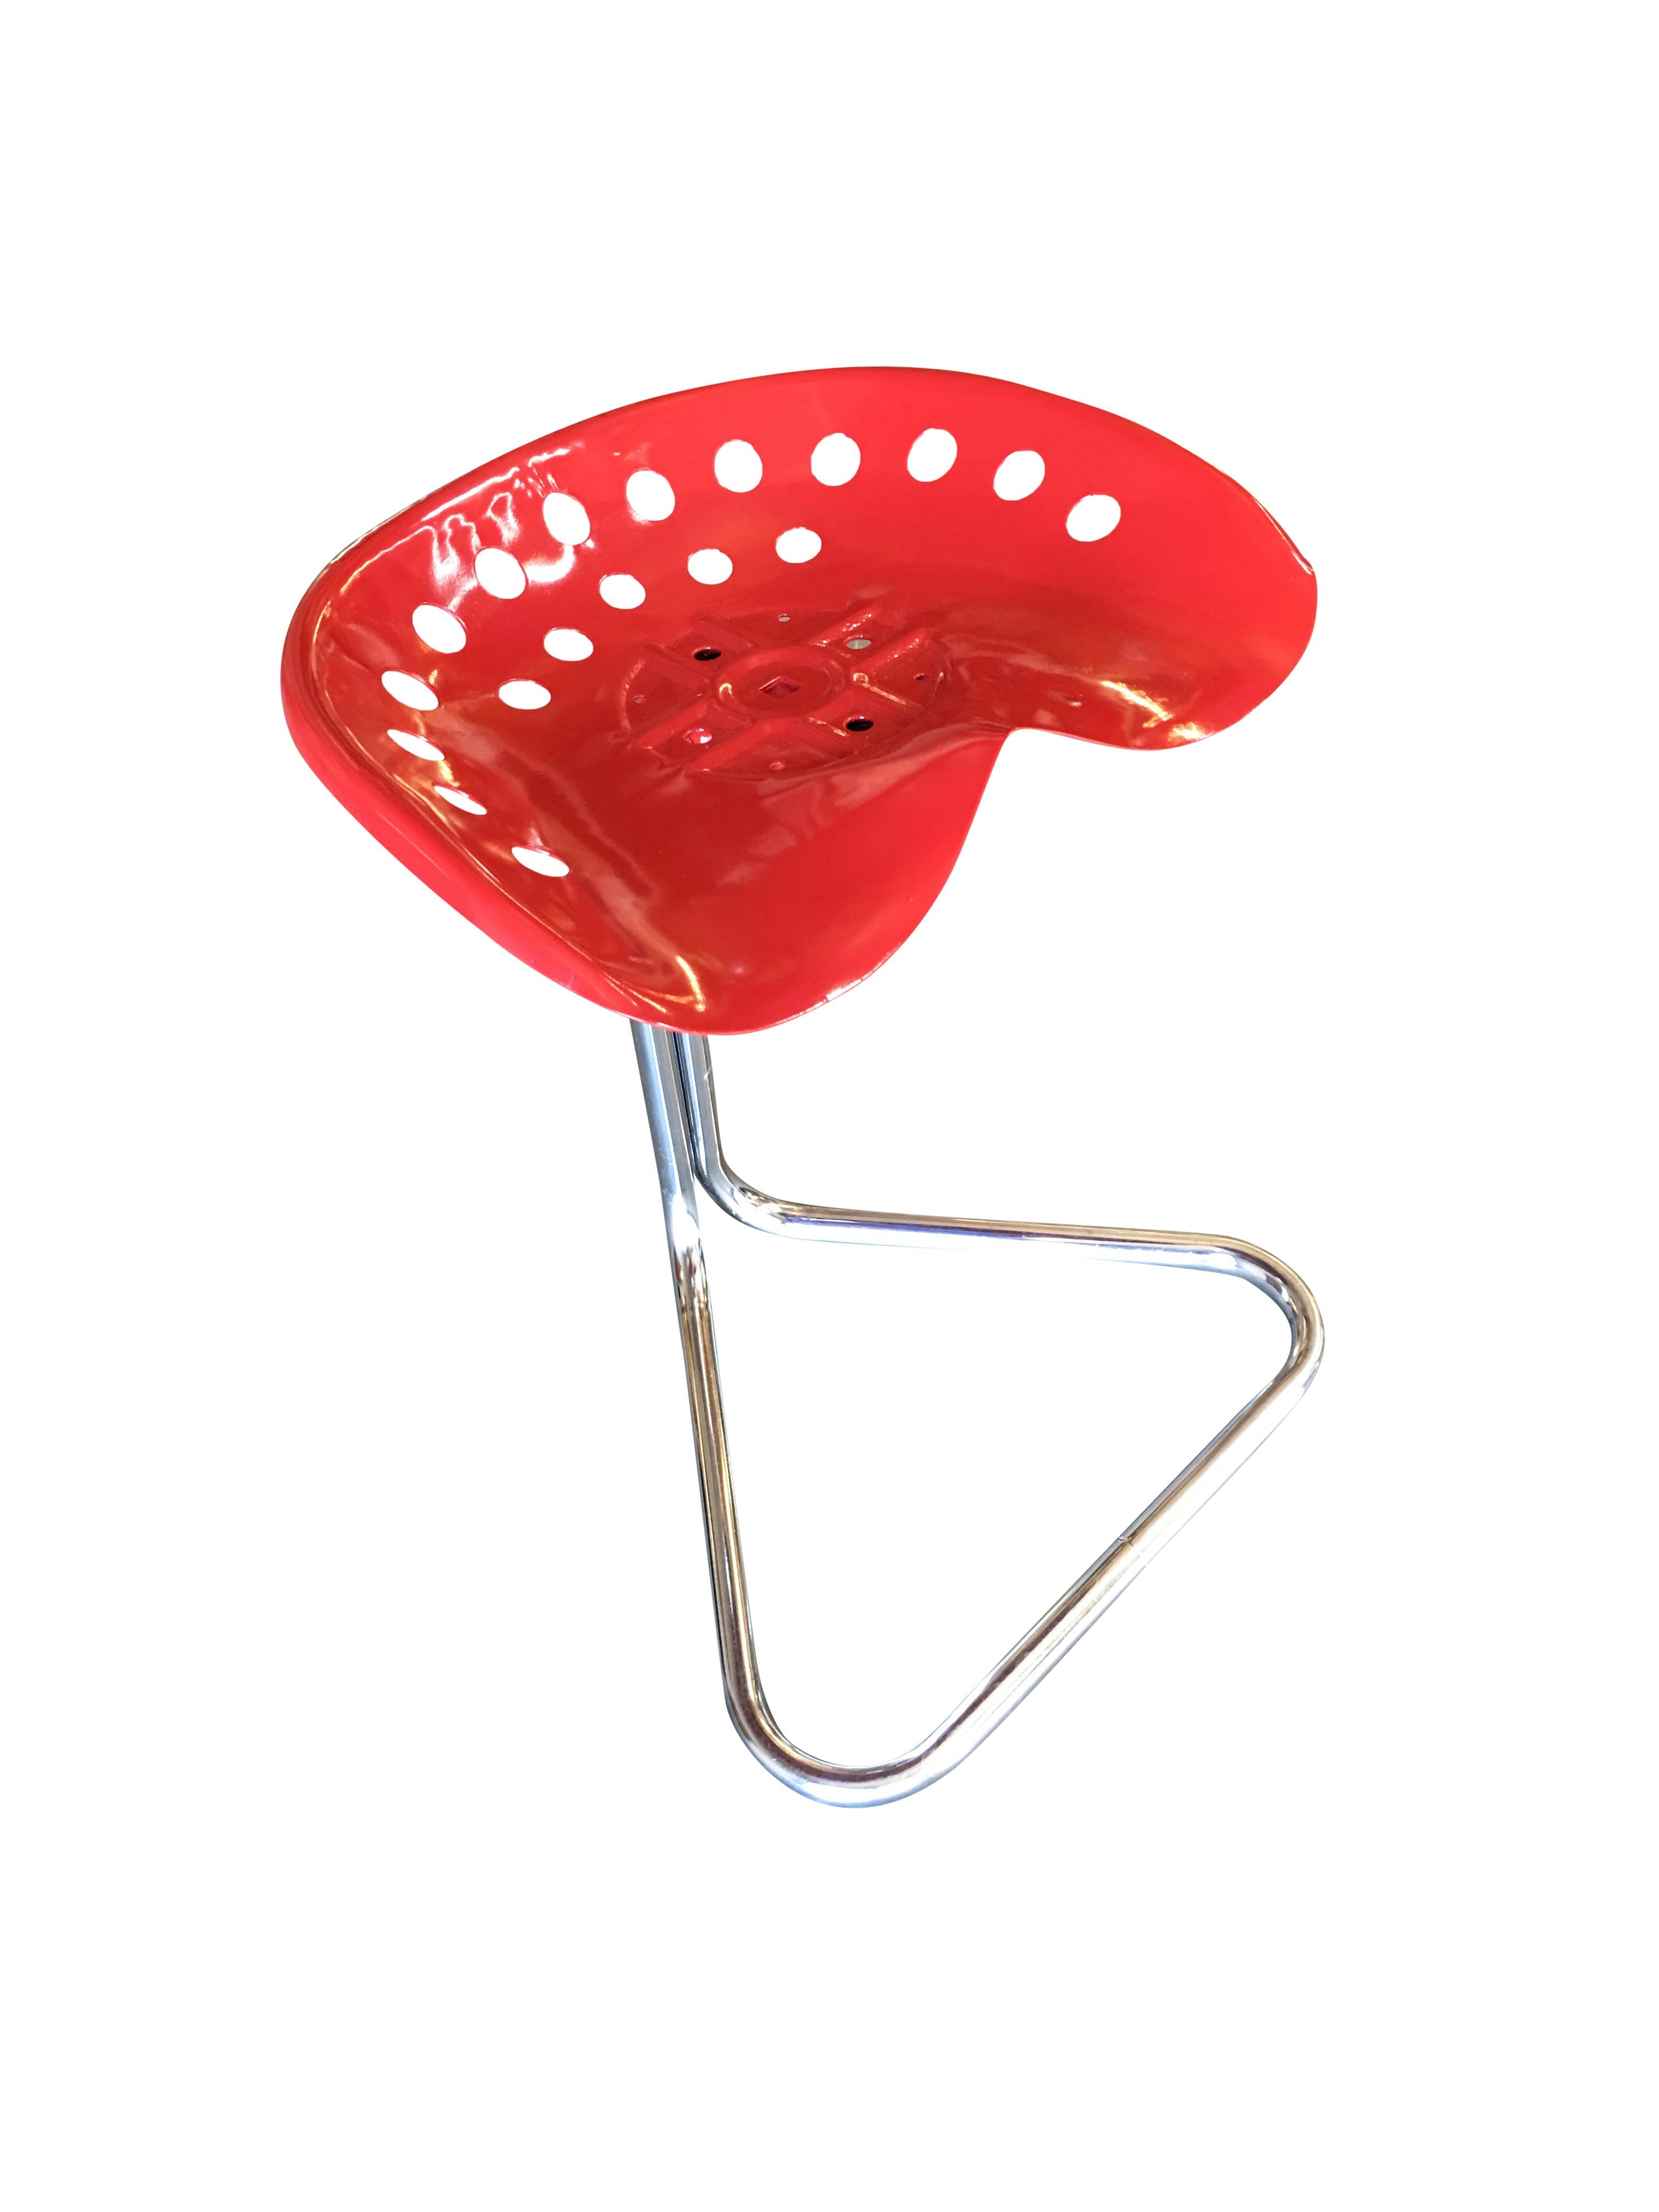 Designed by British designer Rodney Kinsman for his company OMK in 1971, these rare red edition T7 Tractor Stools features a seat made from an actual tractor seat mold. The seat is fixed to a cantilevered base of one inch chrome plated tubular